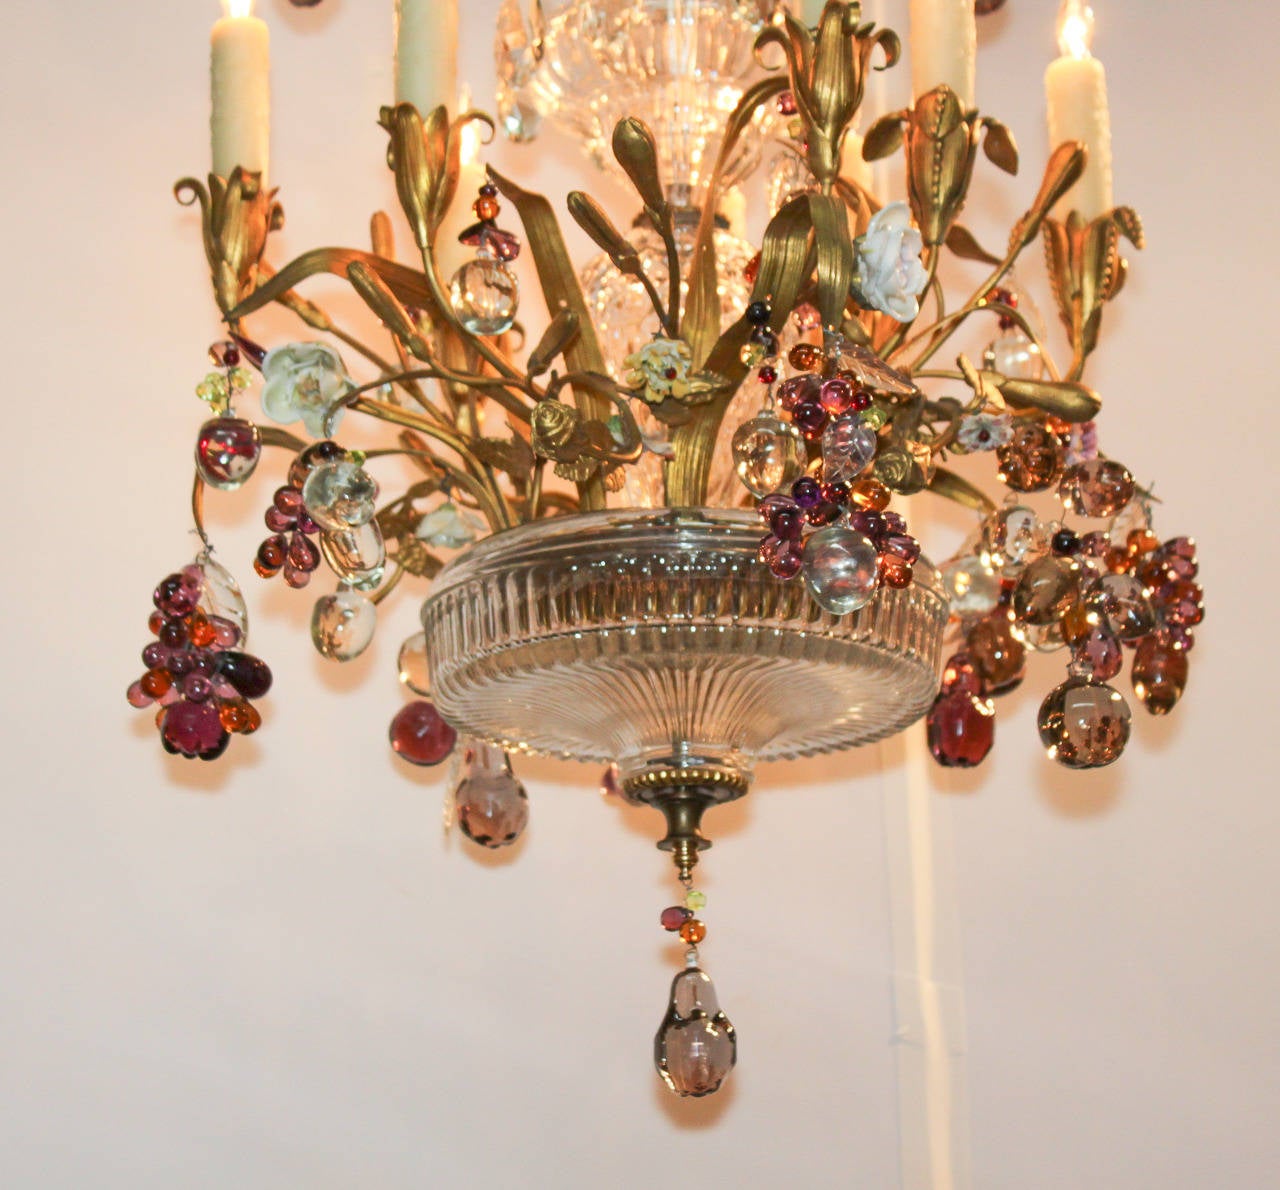 Exceptional French bronze doré bronze, crystal, and amethyst eight-light chandelier. Having three tiers of floral motif adornments, arms and candle-cups in floral design, amethyst and crystal grape clusters, and impressive central column. A